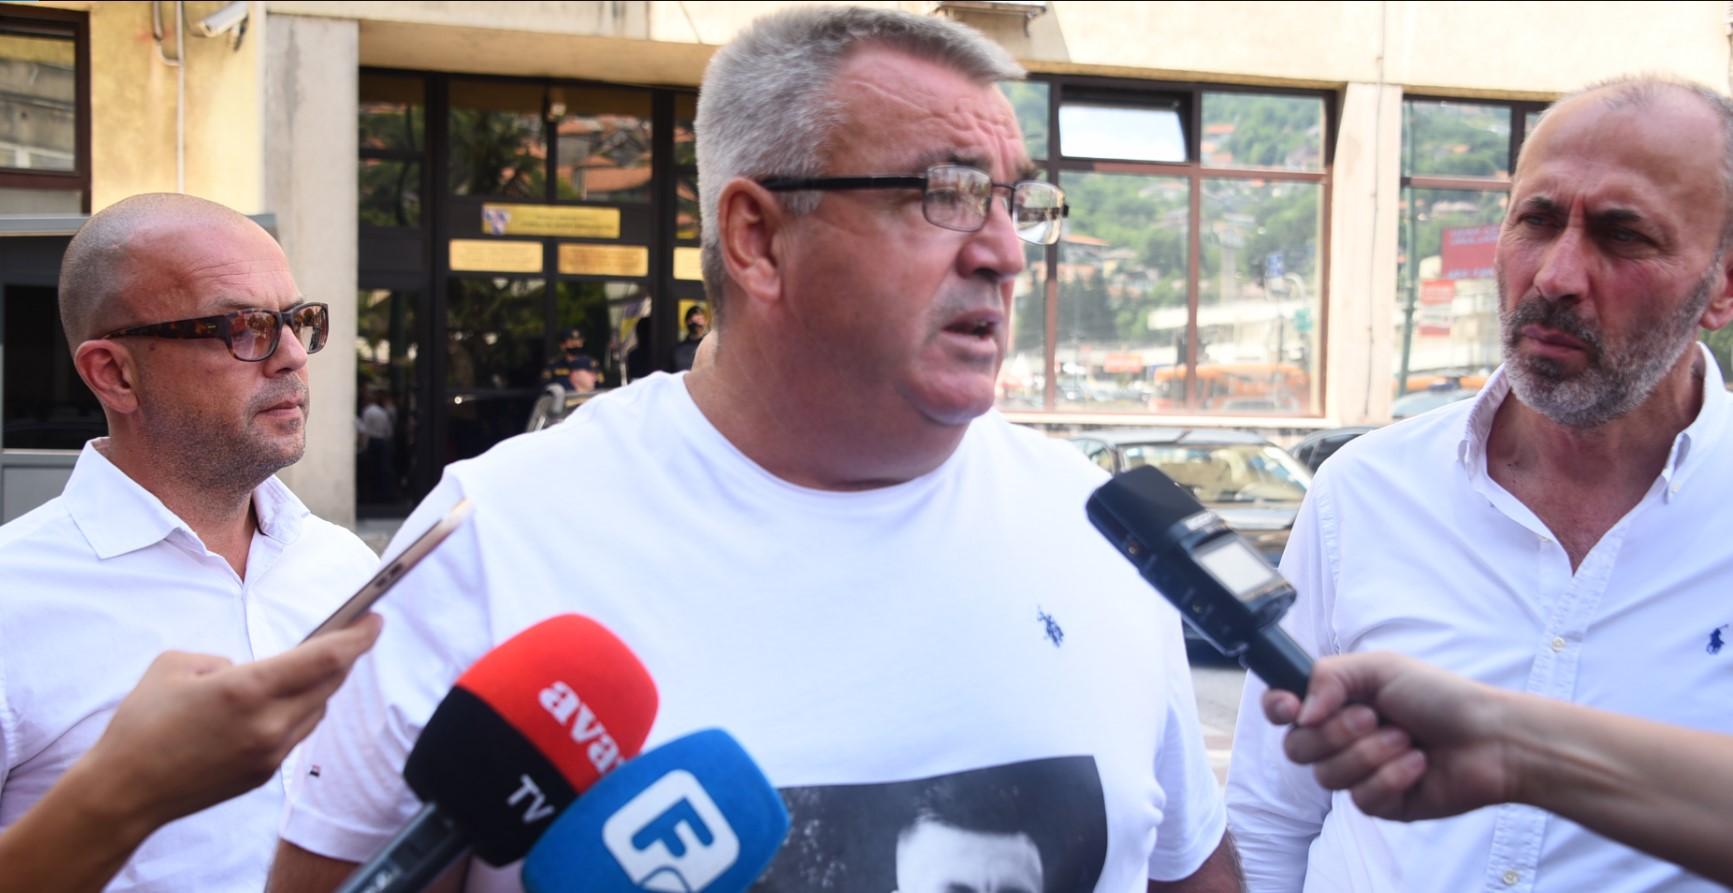 Muriz Memić: I expect acquittal because we all know that there was no traffic accident